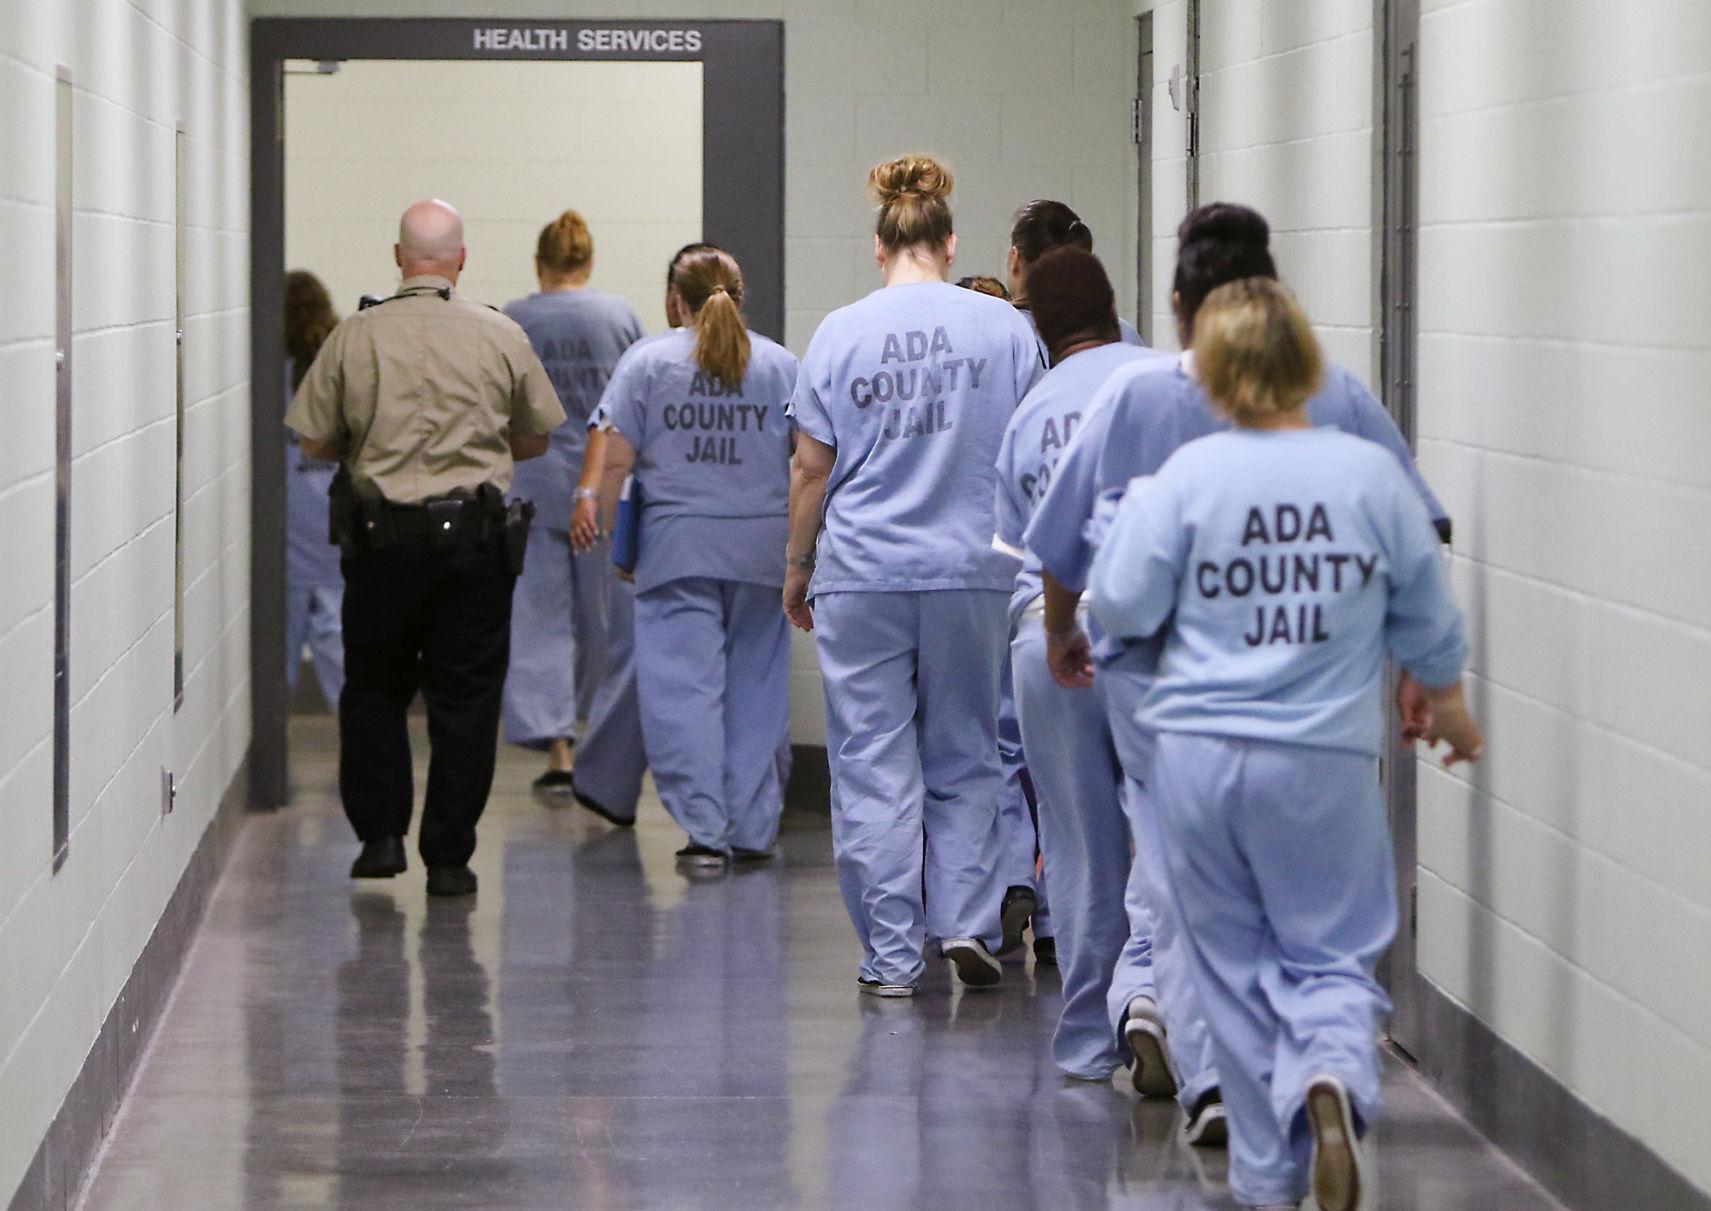 More than 220 Ada jail inmates have tested COVIDpositive in month